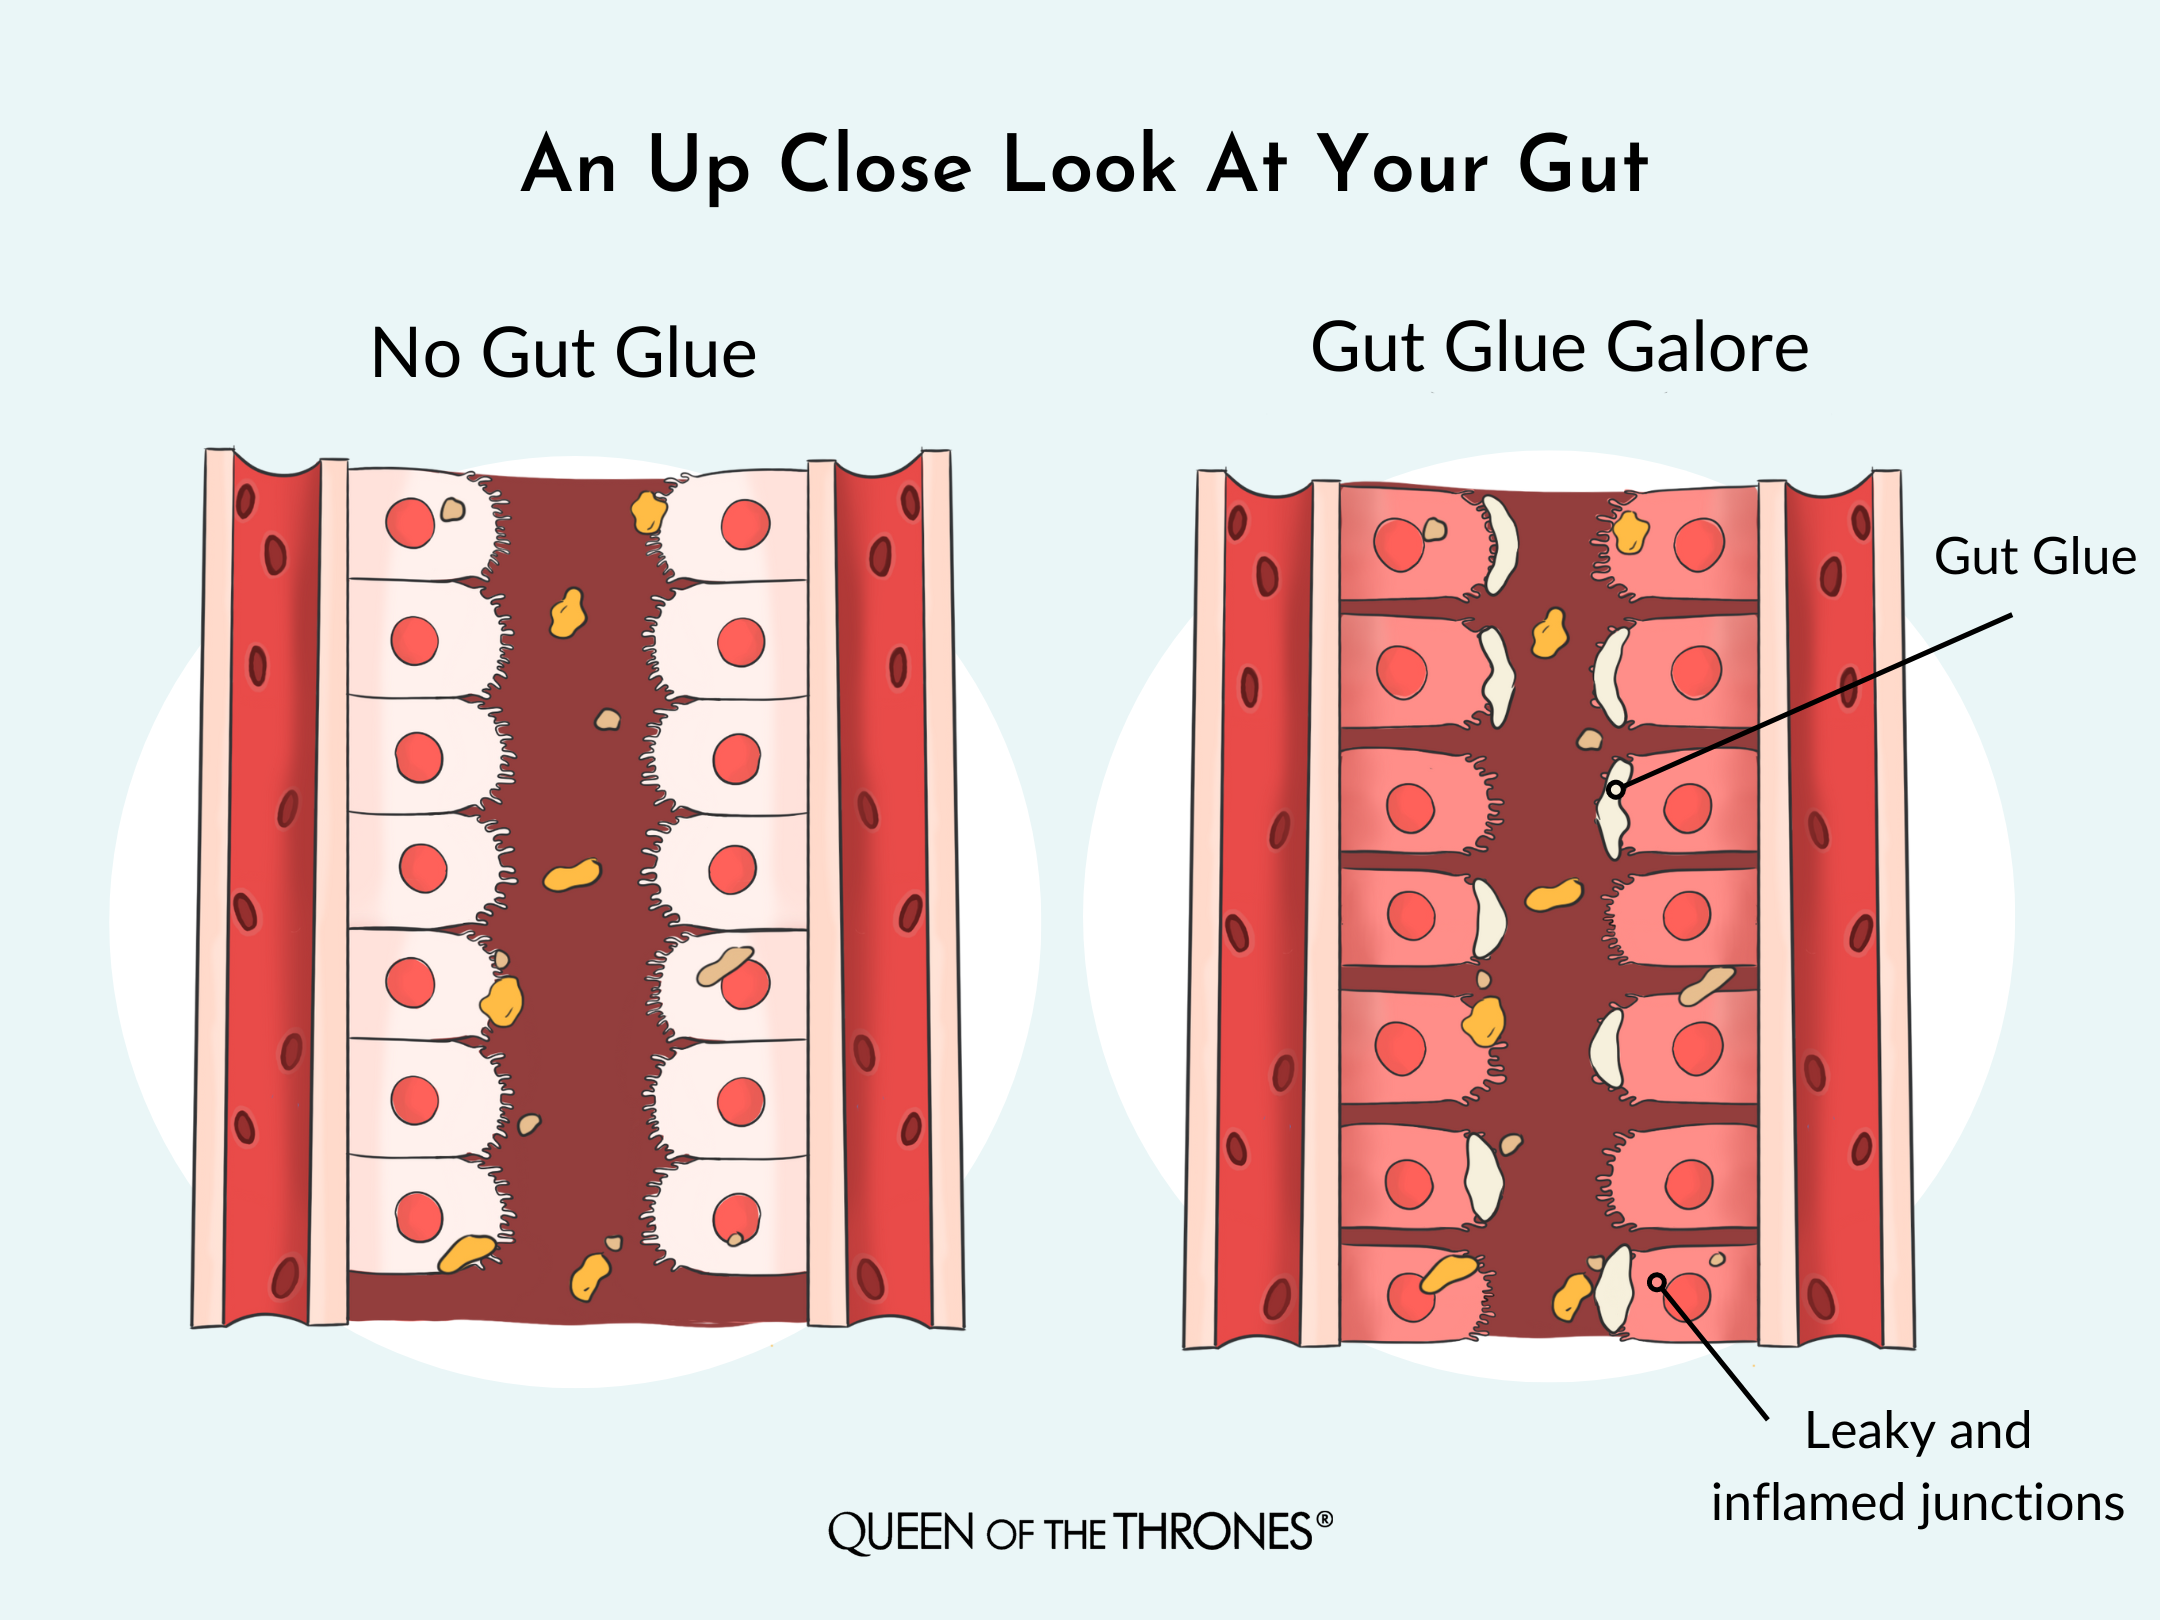 Gut glue junction by Queen of the Thrones